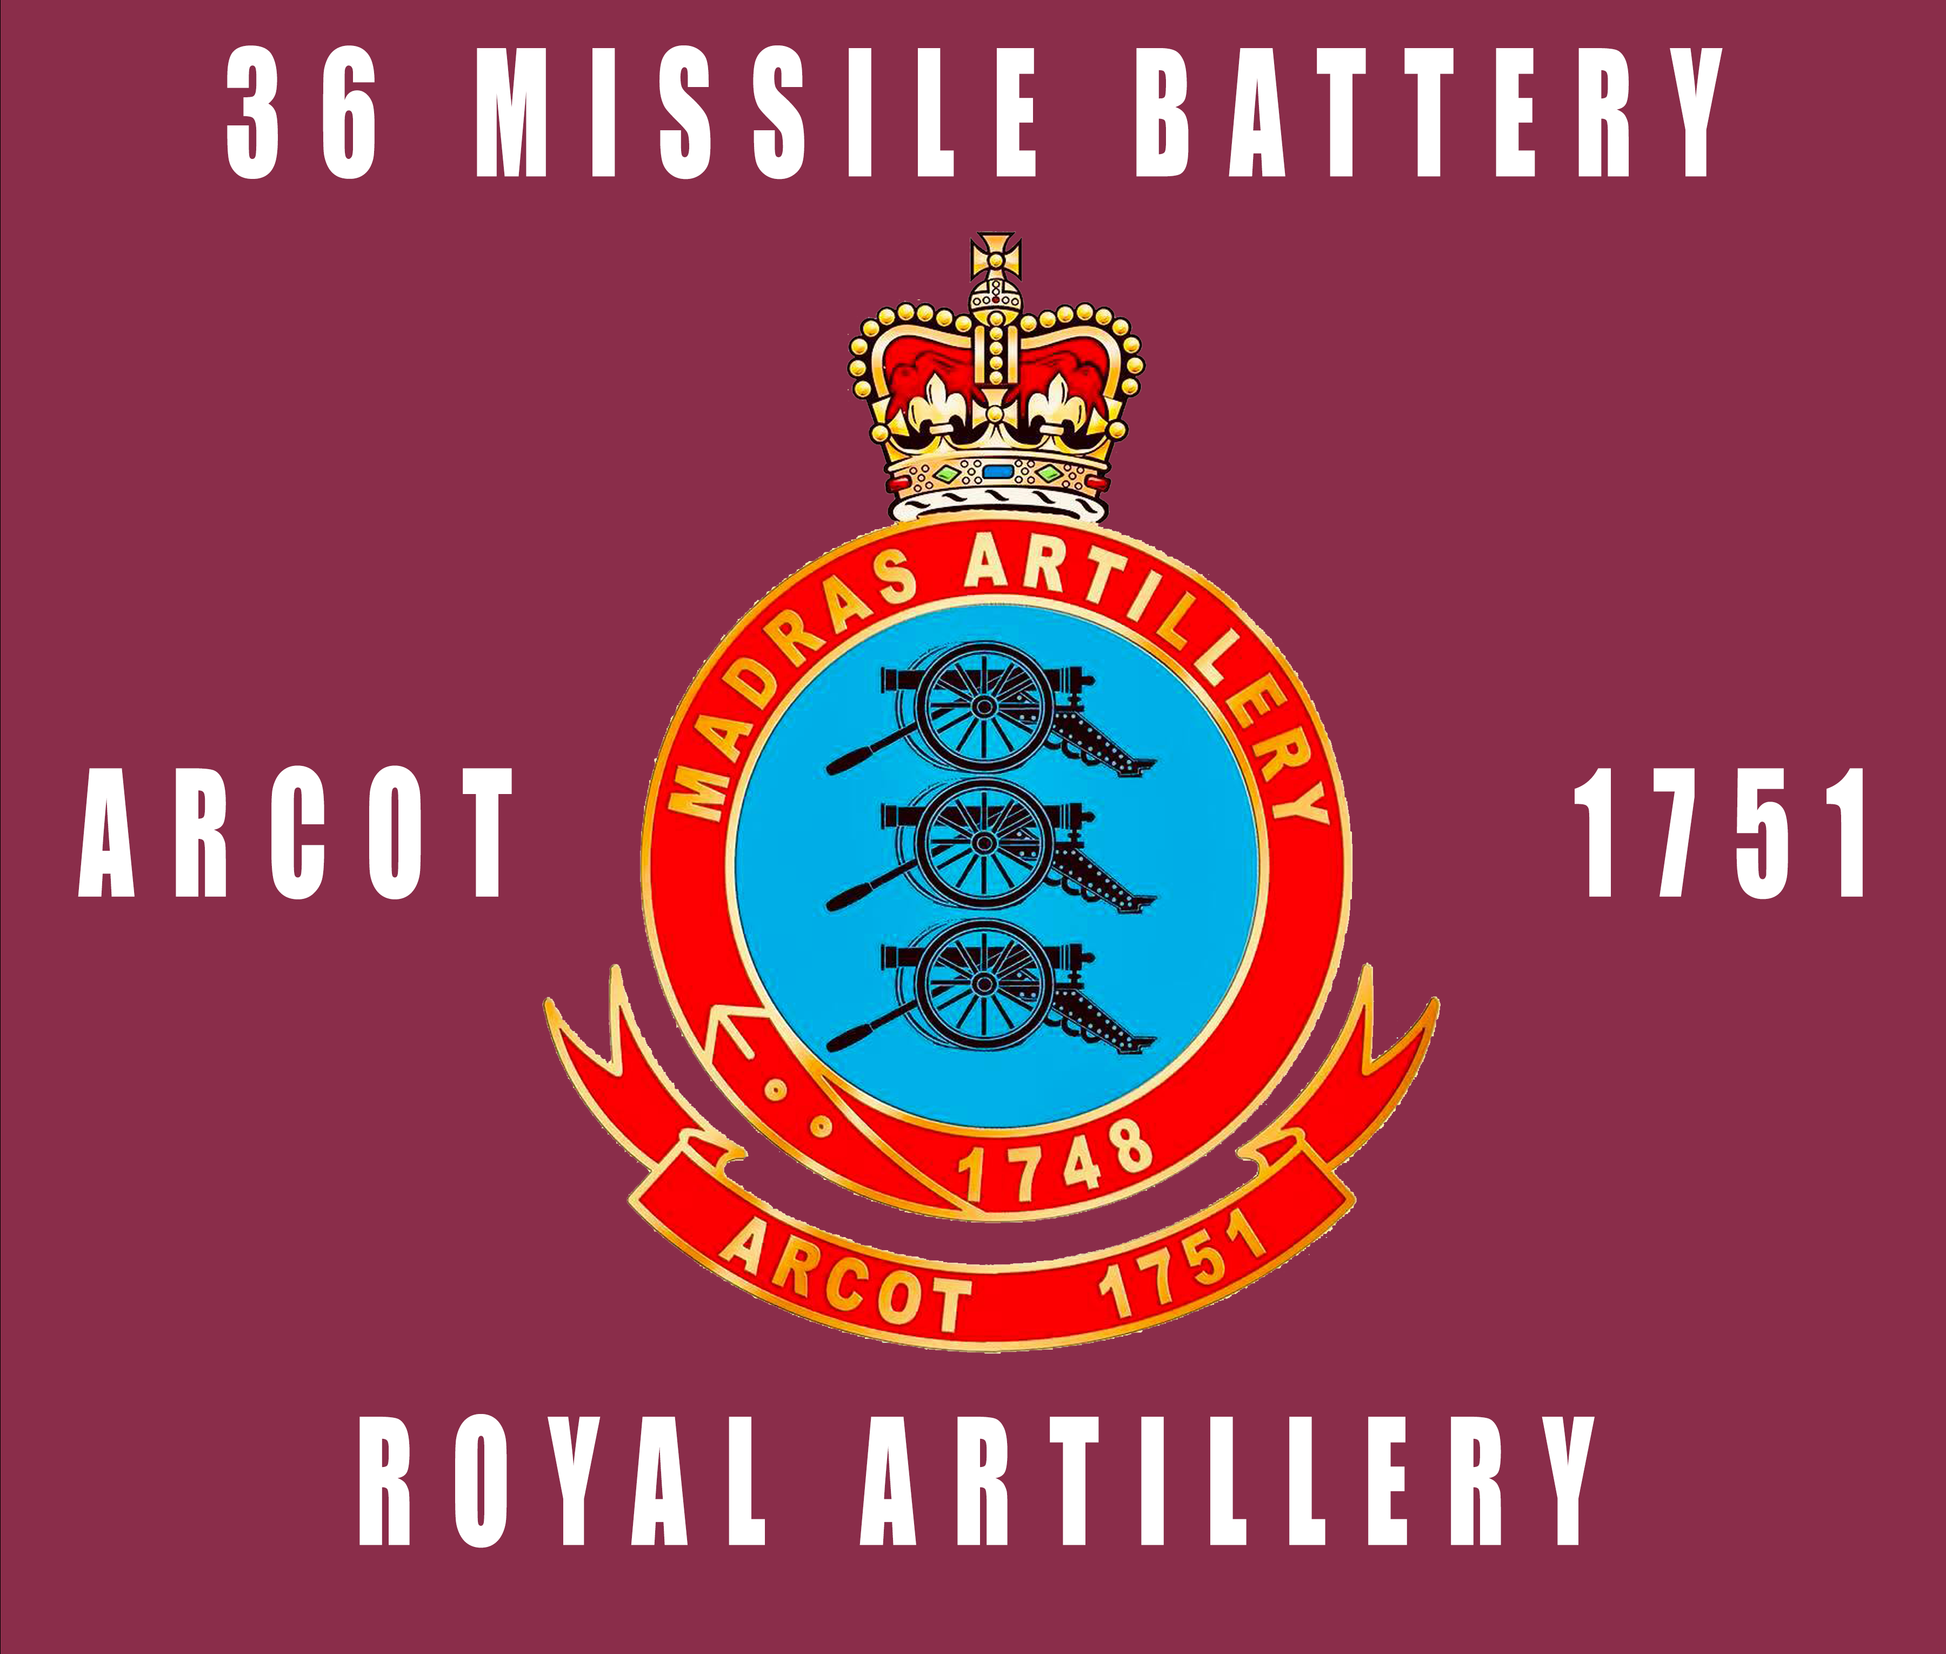 36 Battery T Shirt - Army 1157 kit 50 Missile Regiment RA